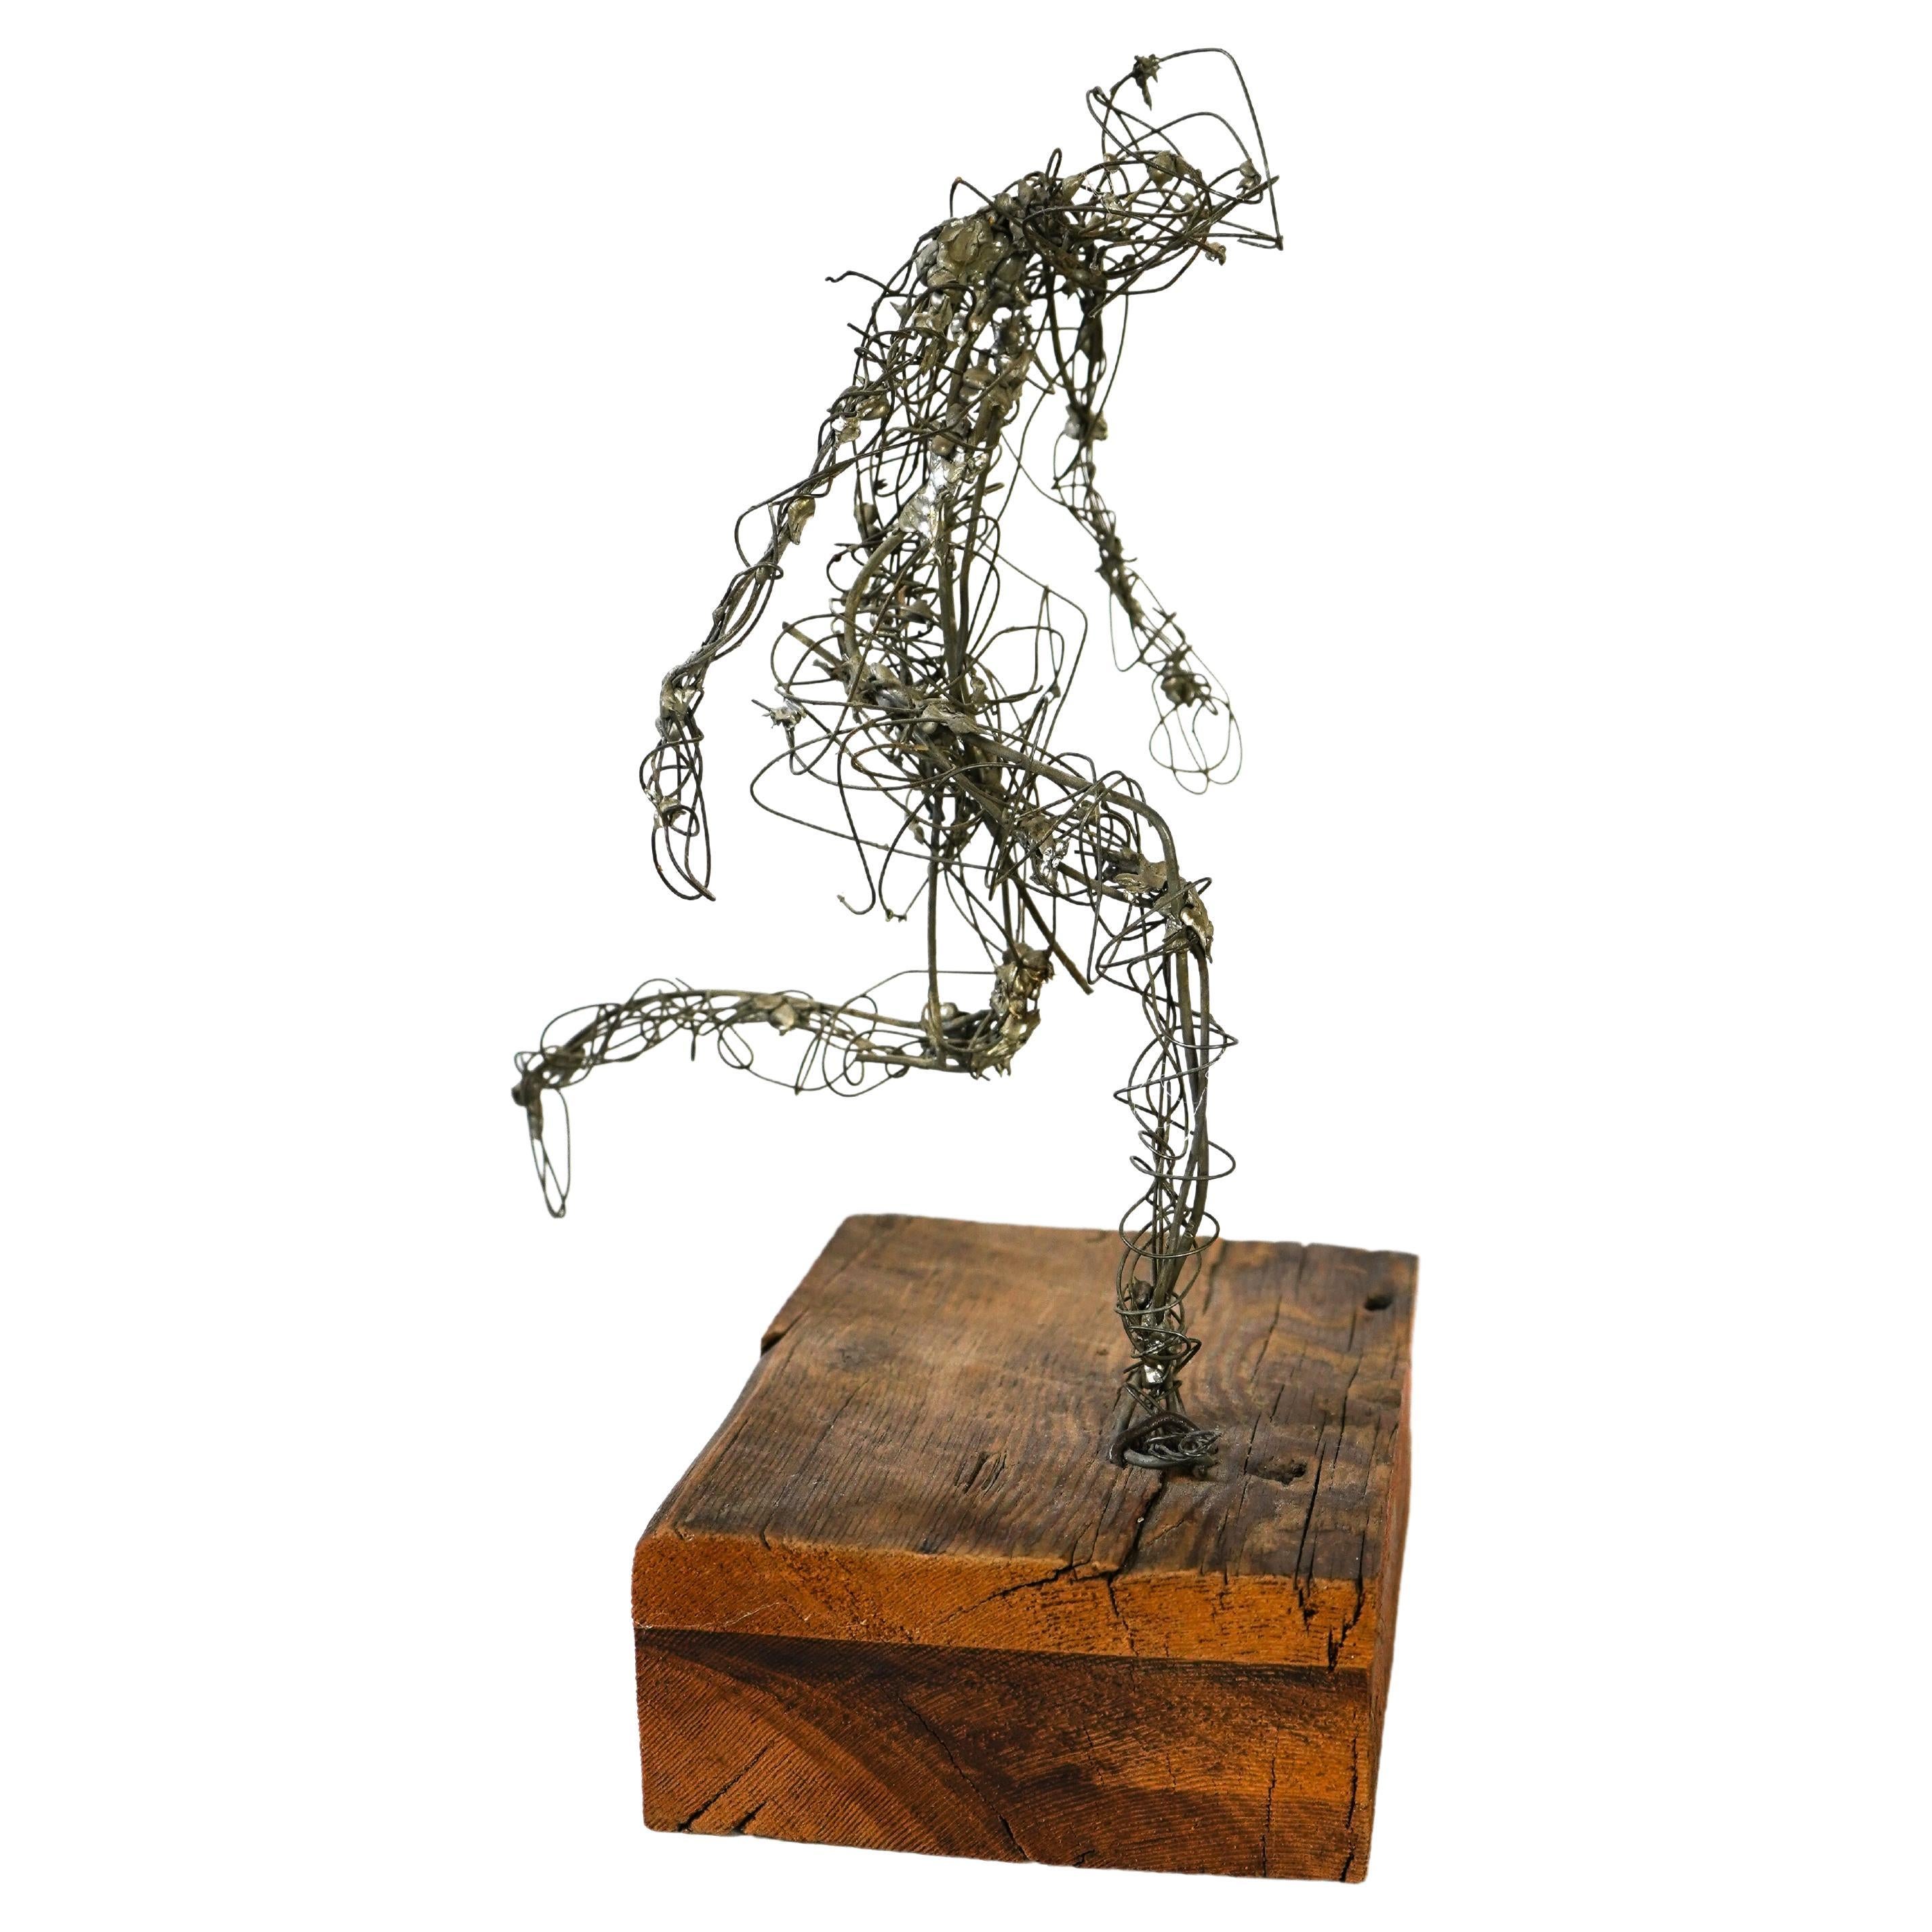 Frances Venardos Gialamas Abstract Wire Figure In Motion Sculpture For Sale